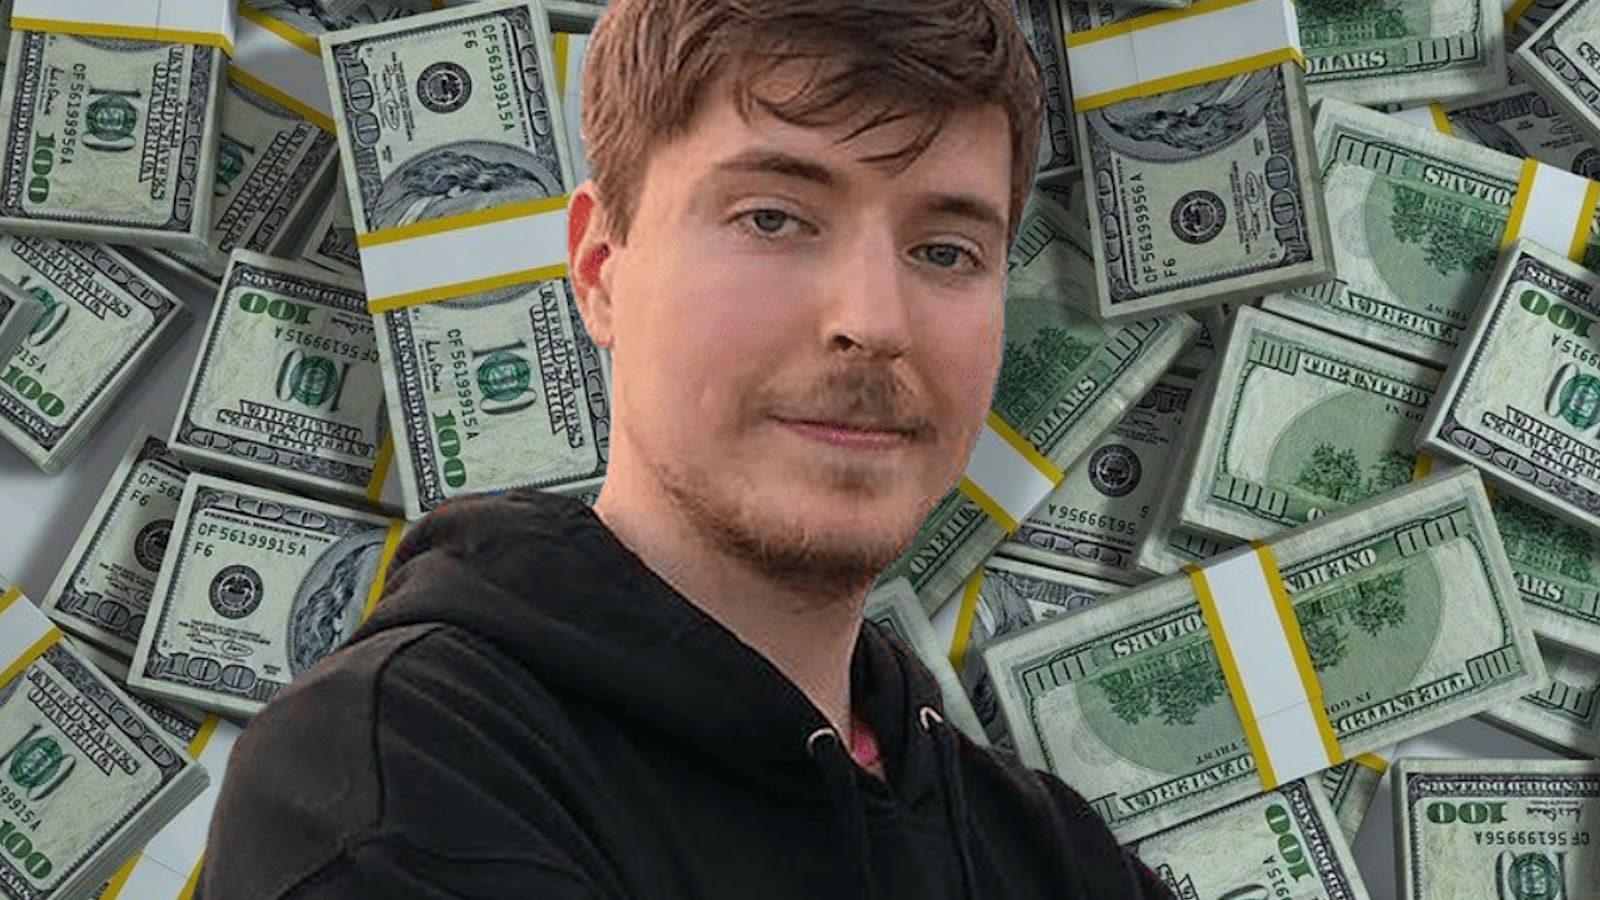 MrBeast urges billionaires to put their “unfathomable wealth” into YouTube content - Dexerto